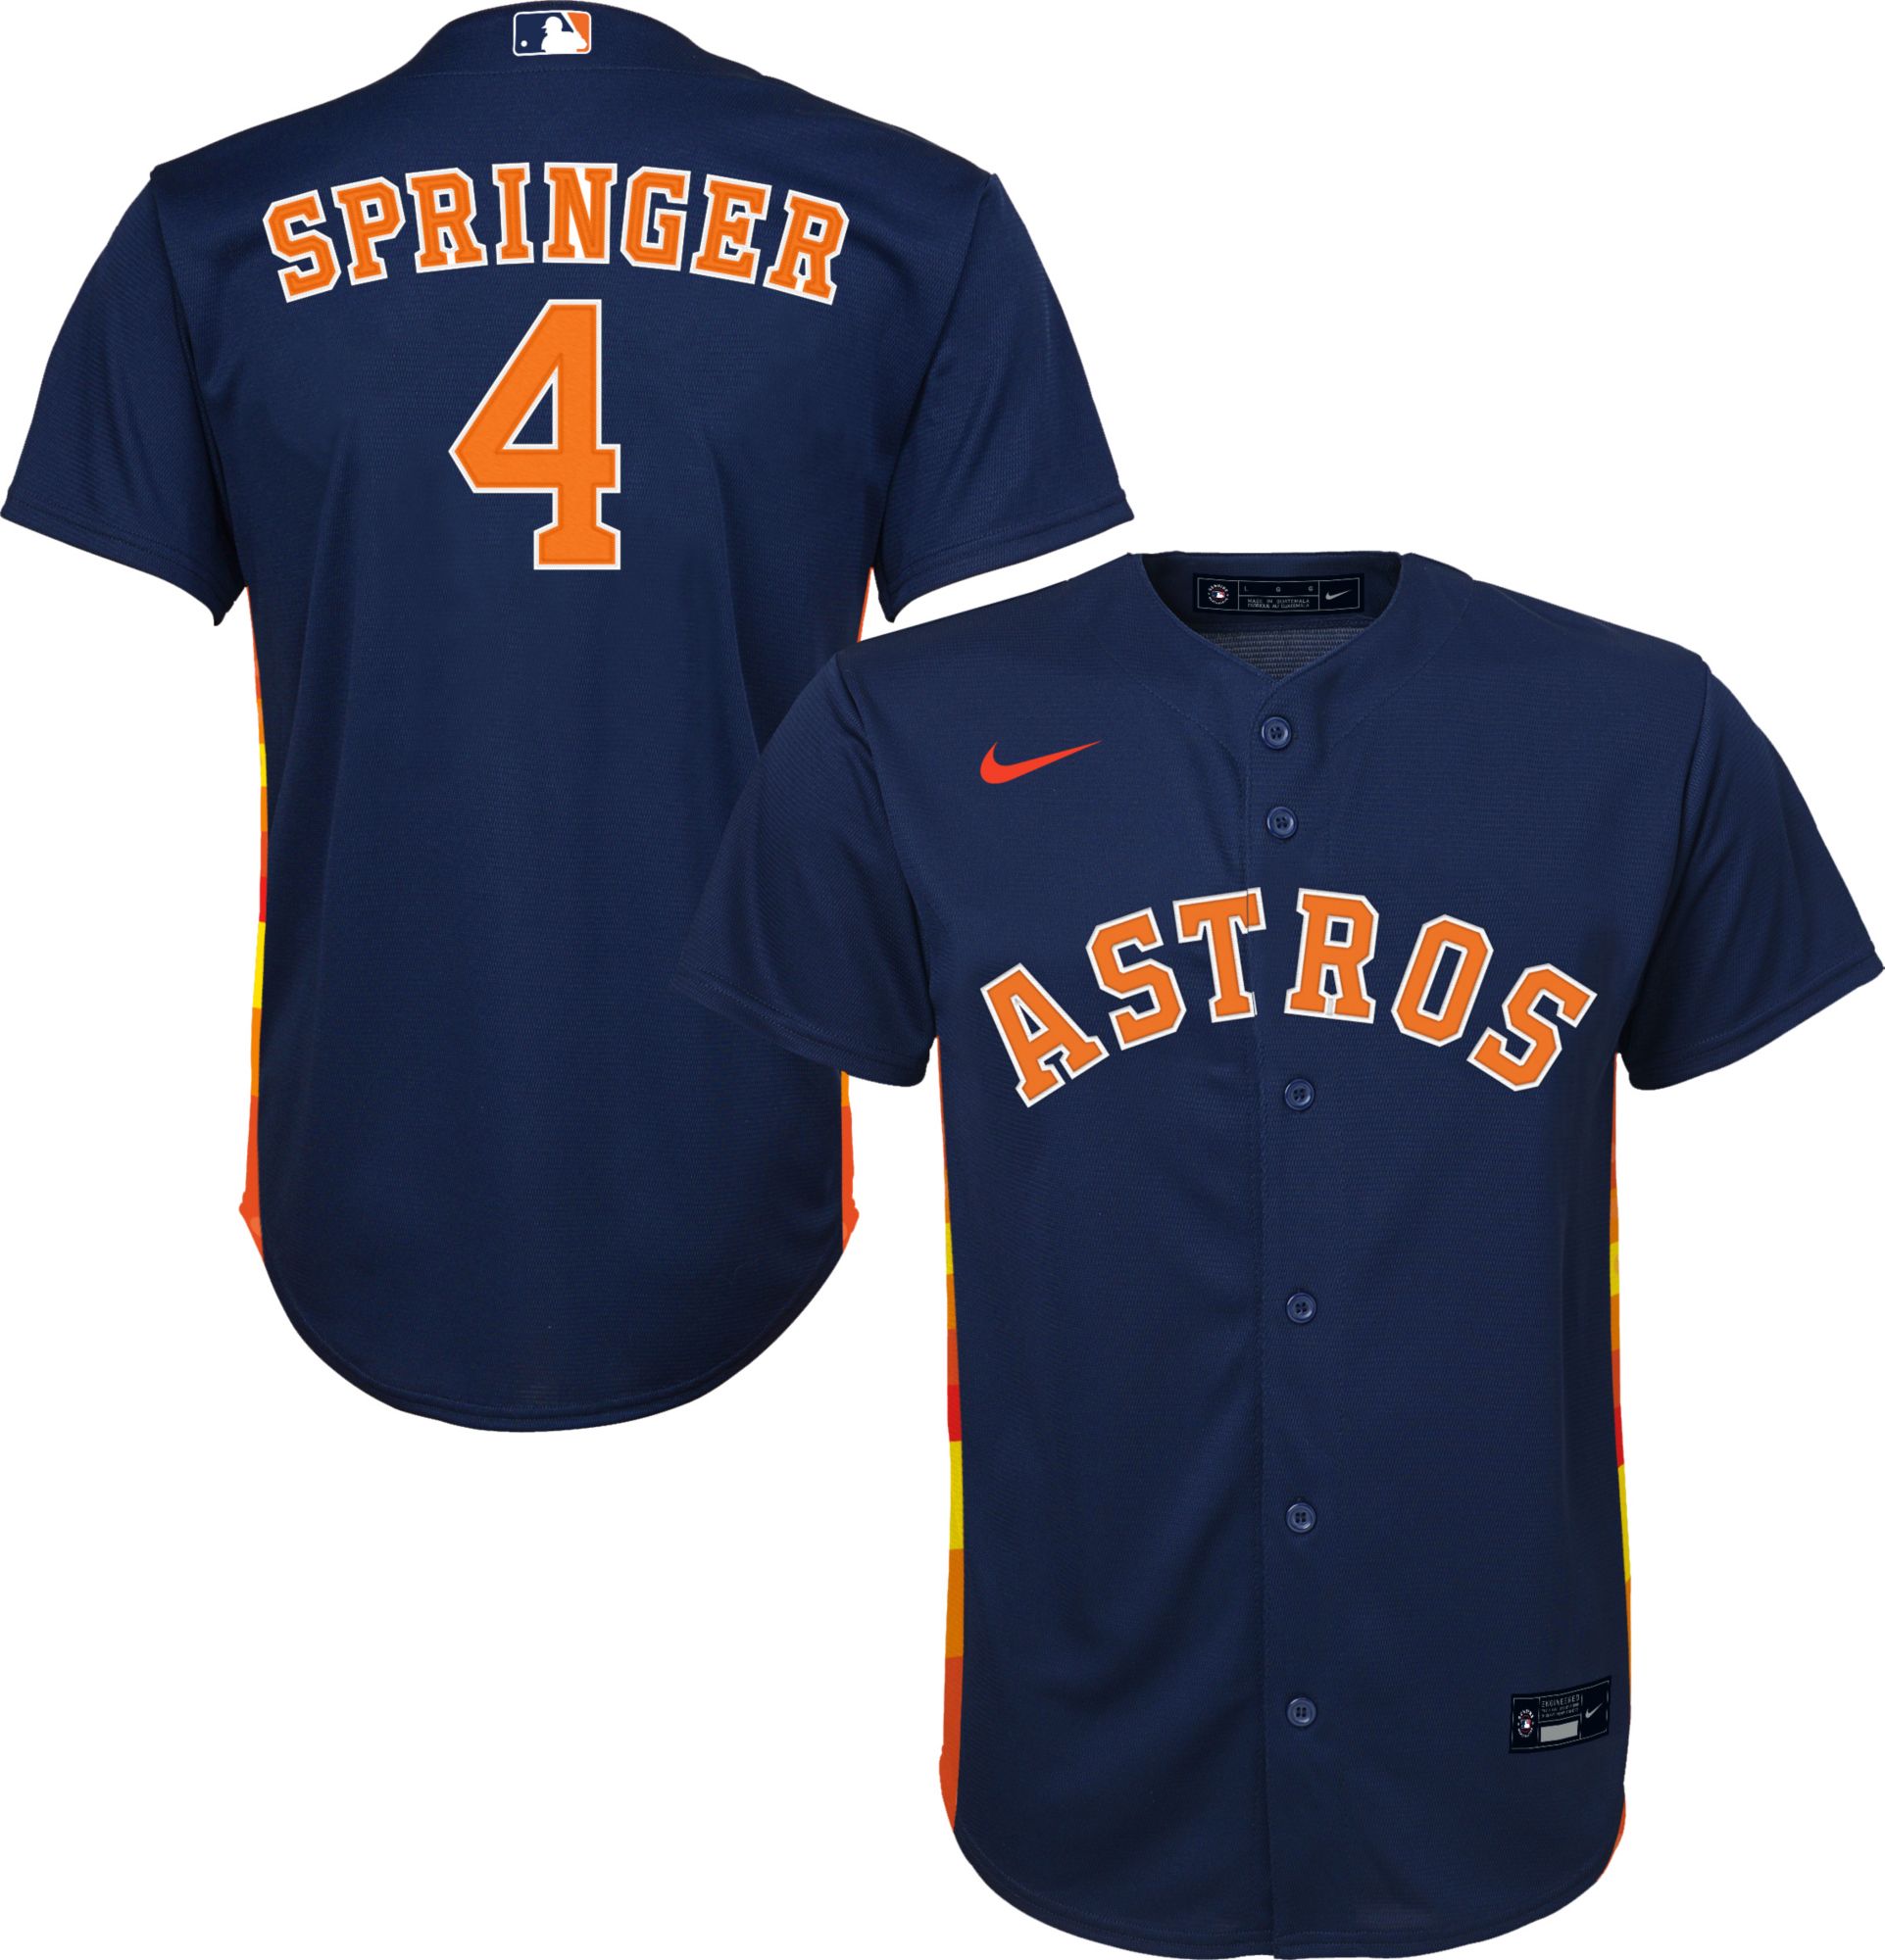 springer youth jersey